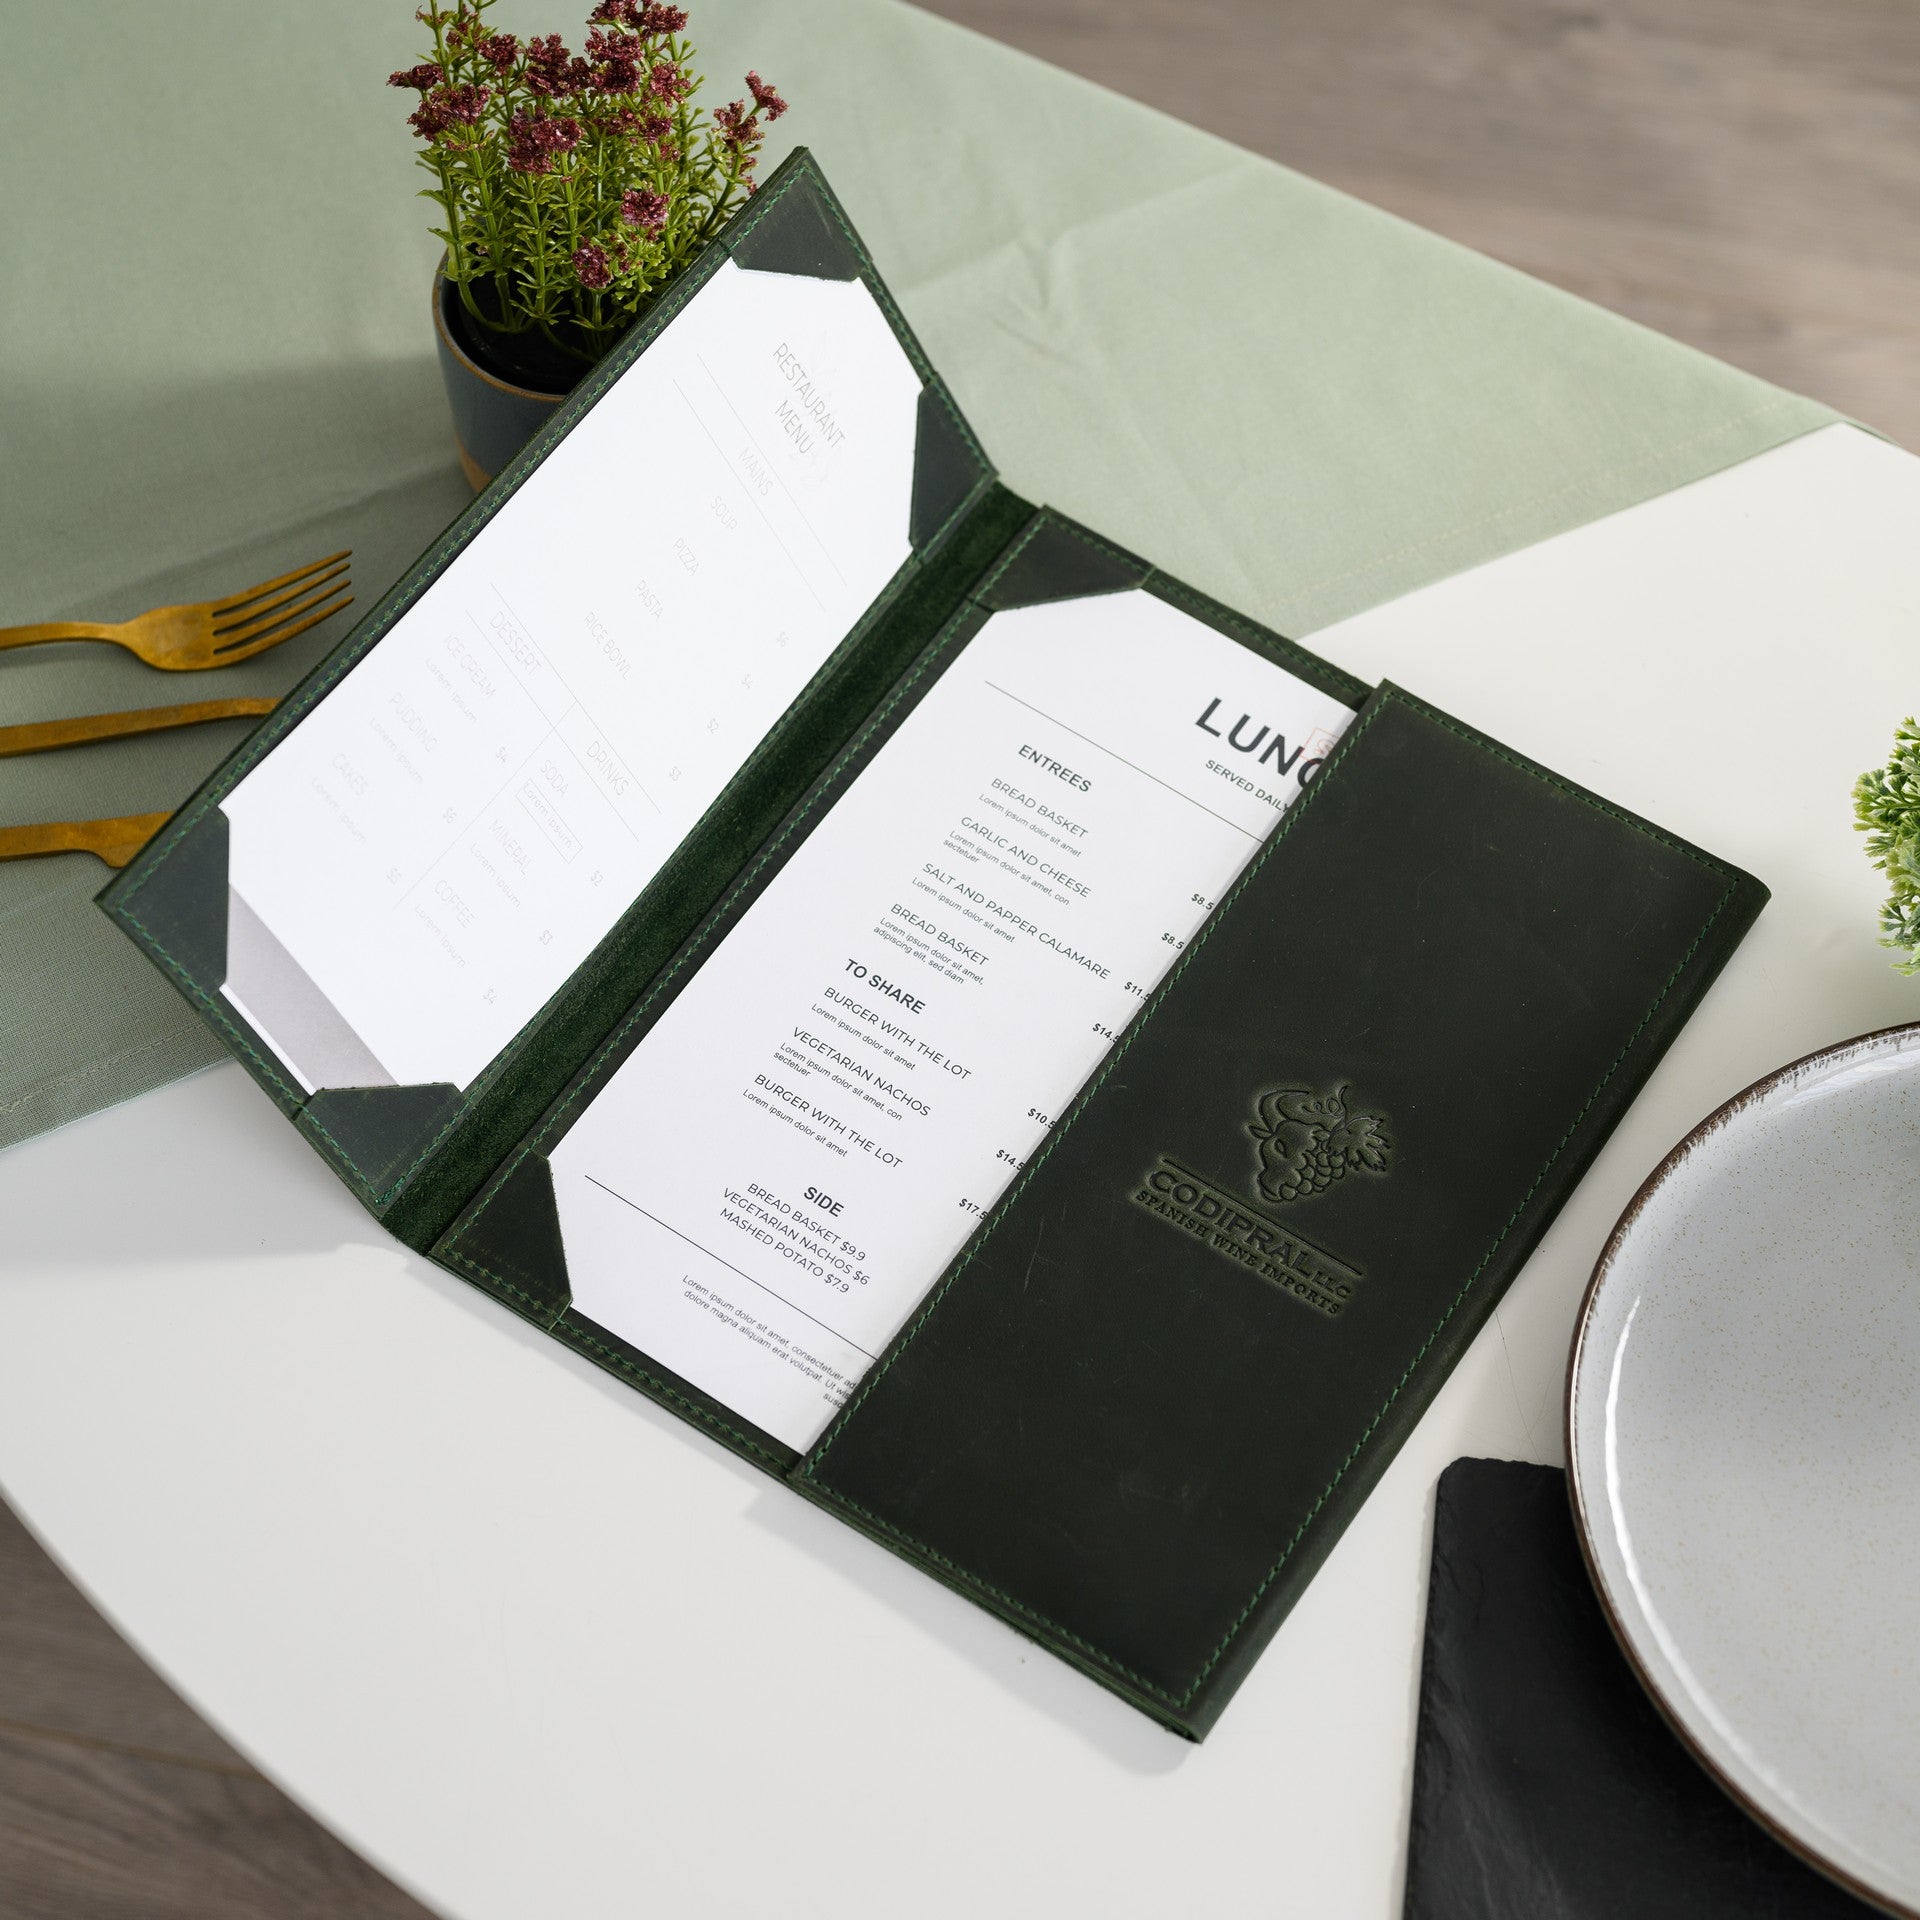 Compact and stylish booklet perfect for showcasing beverage offerings.